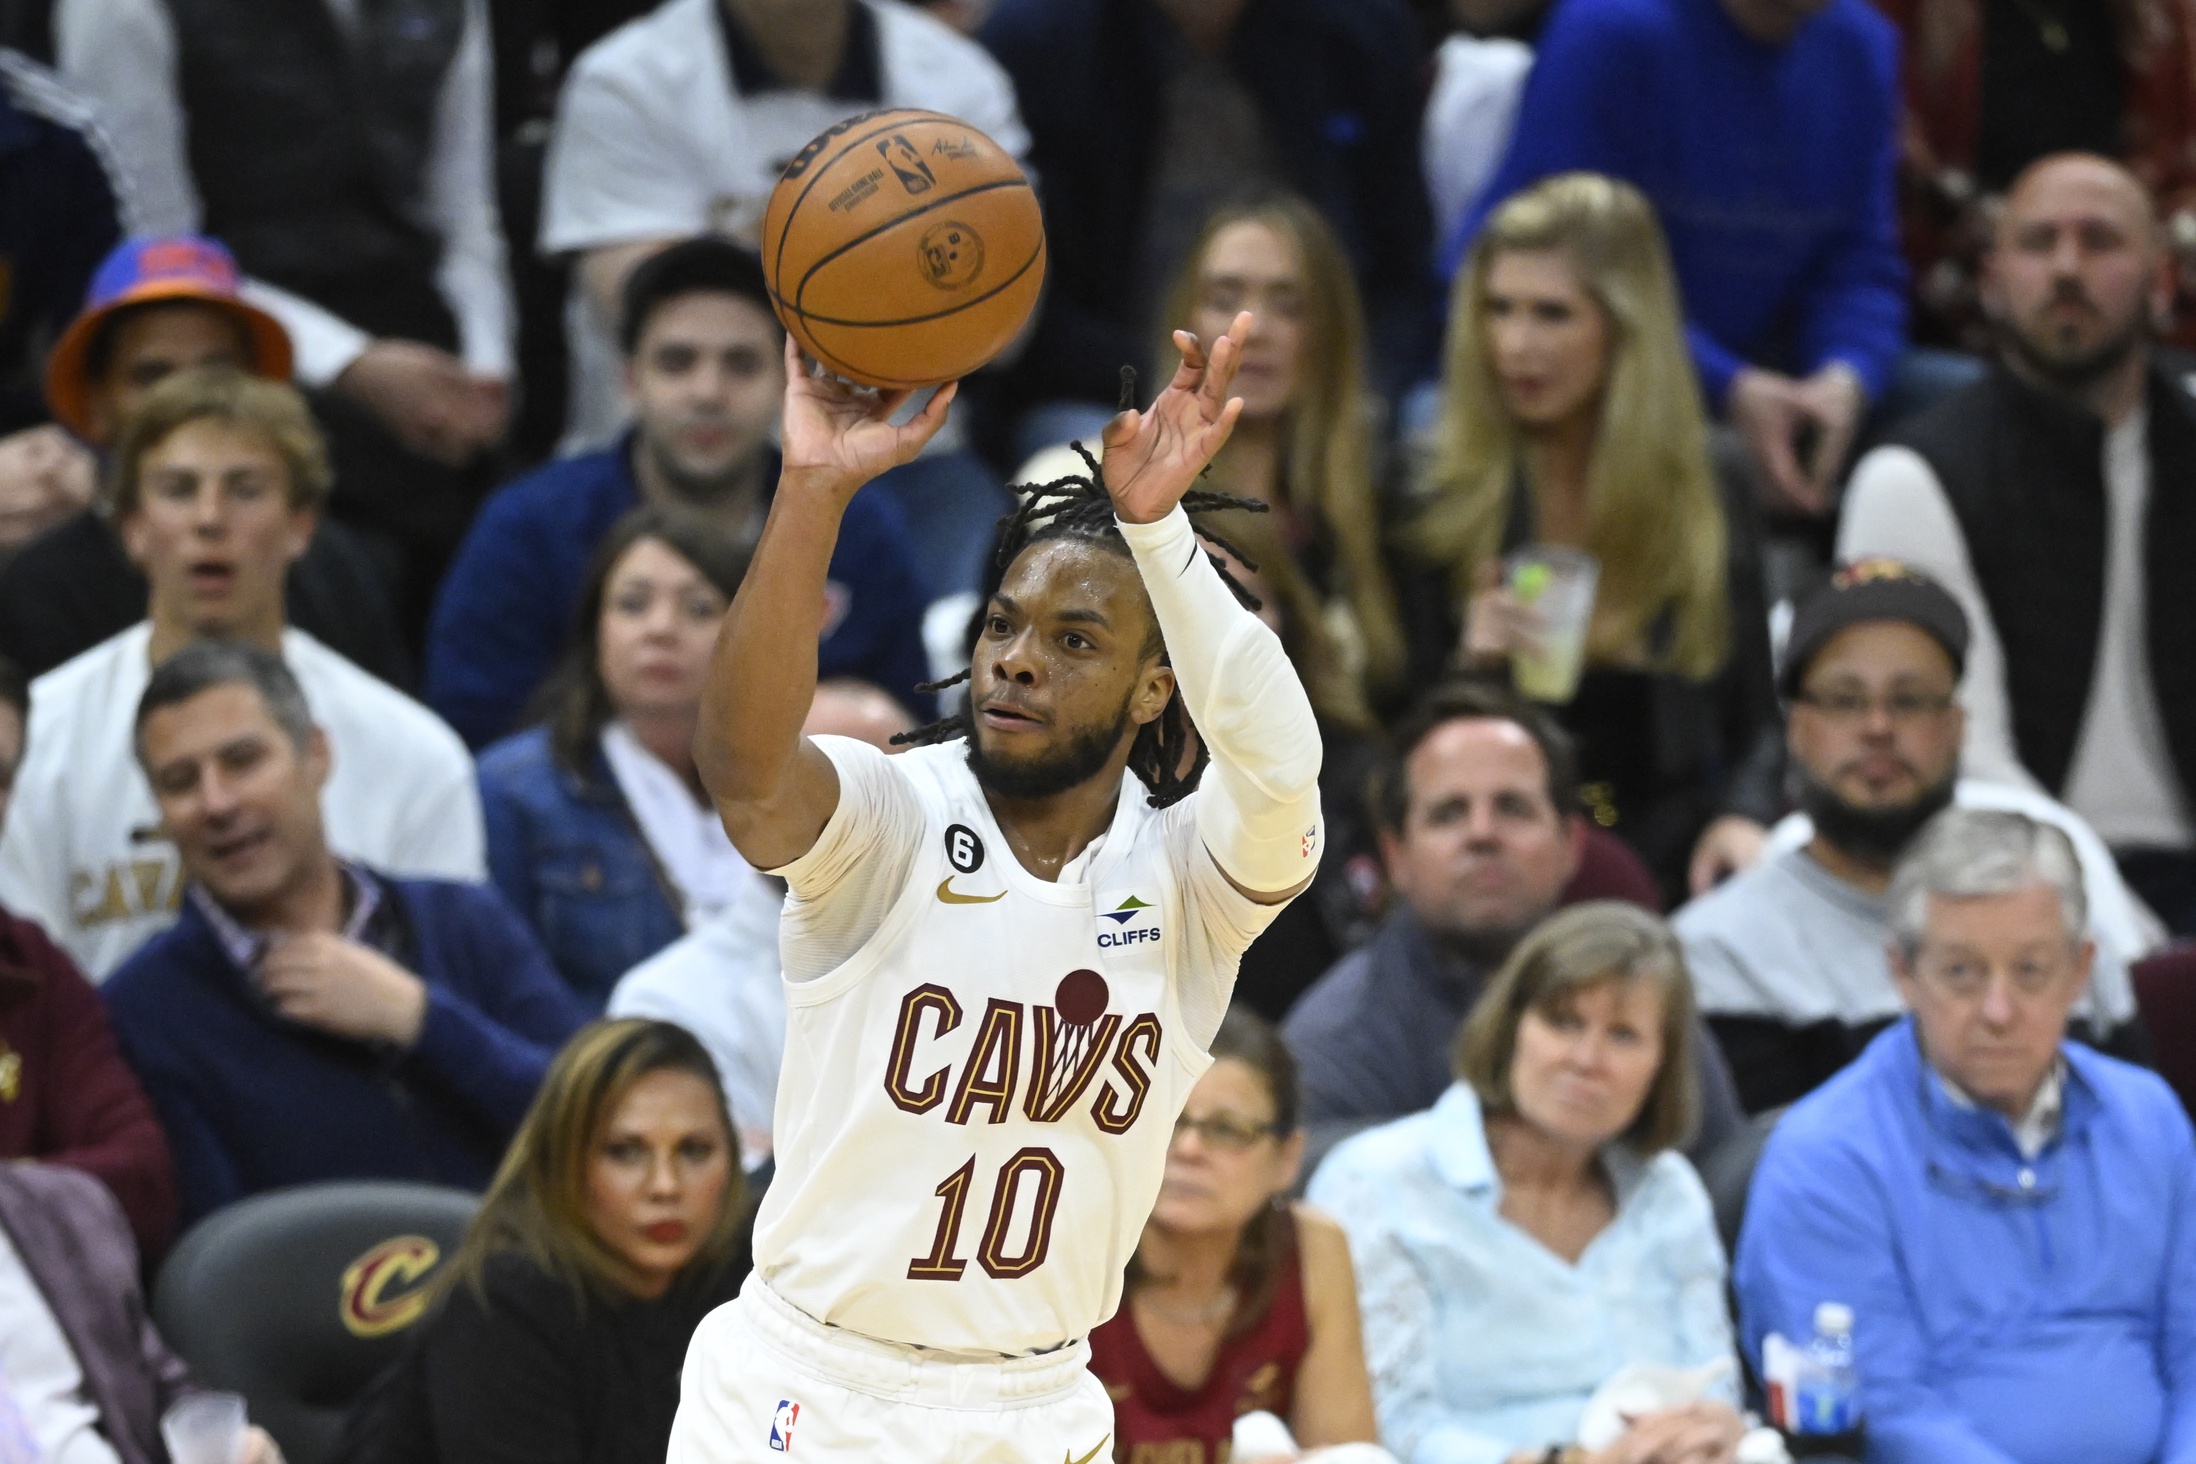 Cup of Cavs: Cleveland Cavaliers news and links for Thursday, Oct